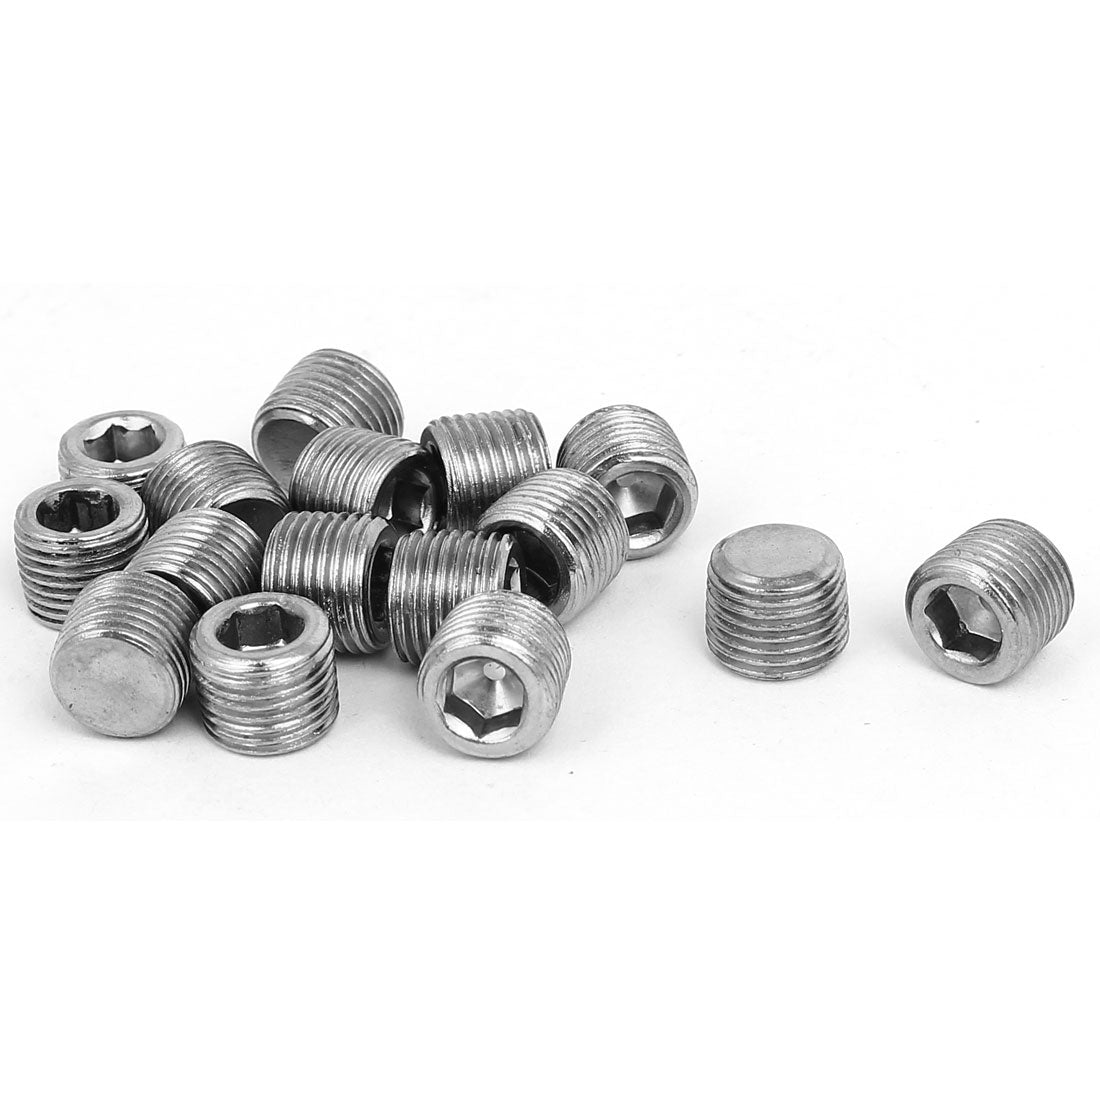 uxcell Uxcell 1/8-inch Male Thread 8mm Height Hex Socket Flat Point Grub Screws 16pcs